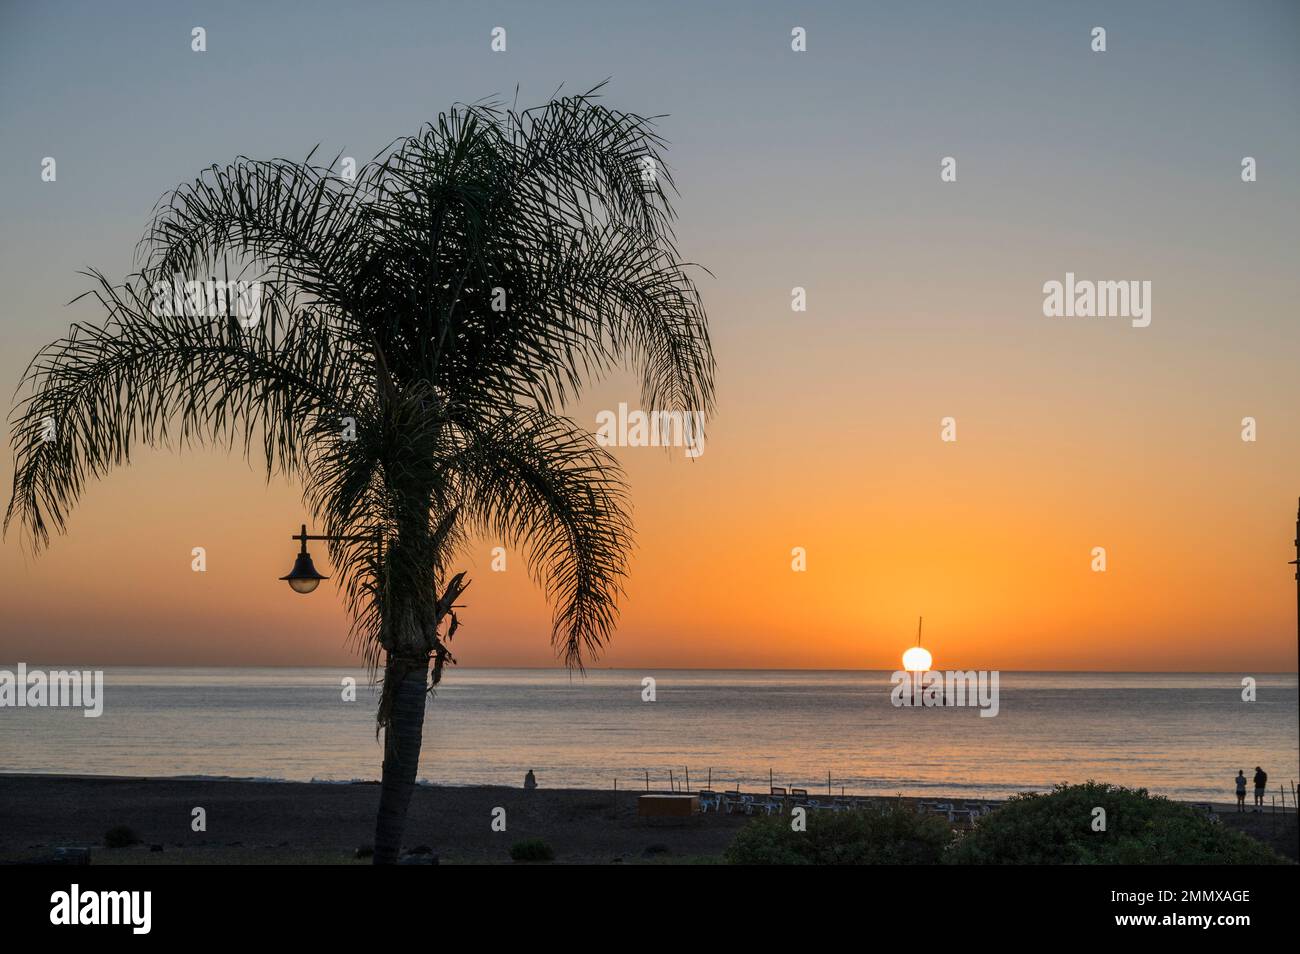 Sunrise with Palm Tree in silhouette at Puerto Del Carment, Canary Islands. Stock Photo